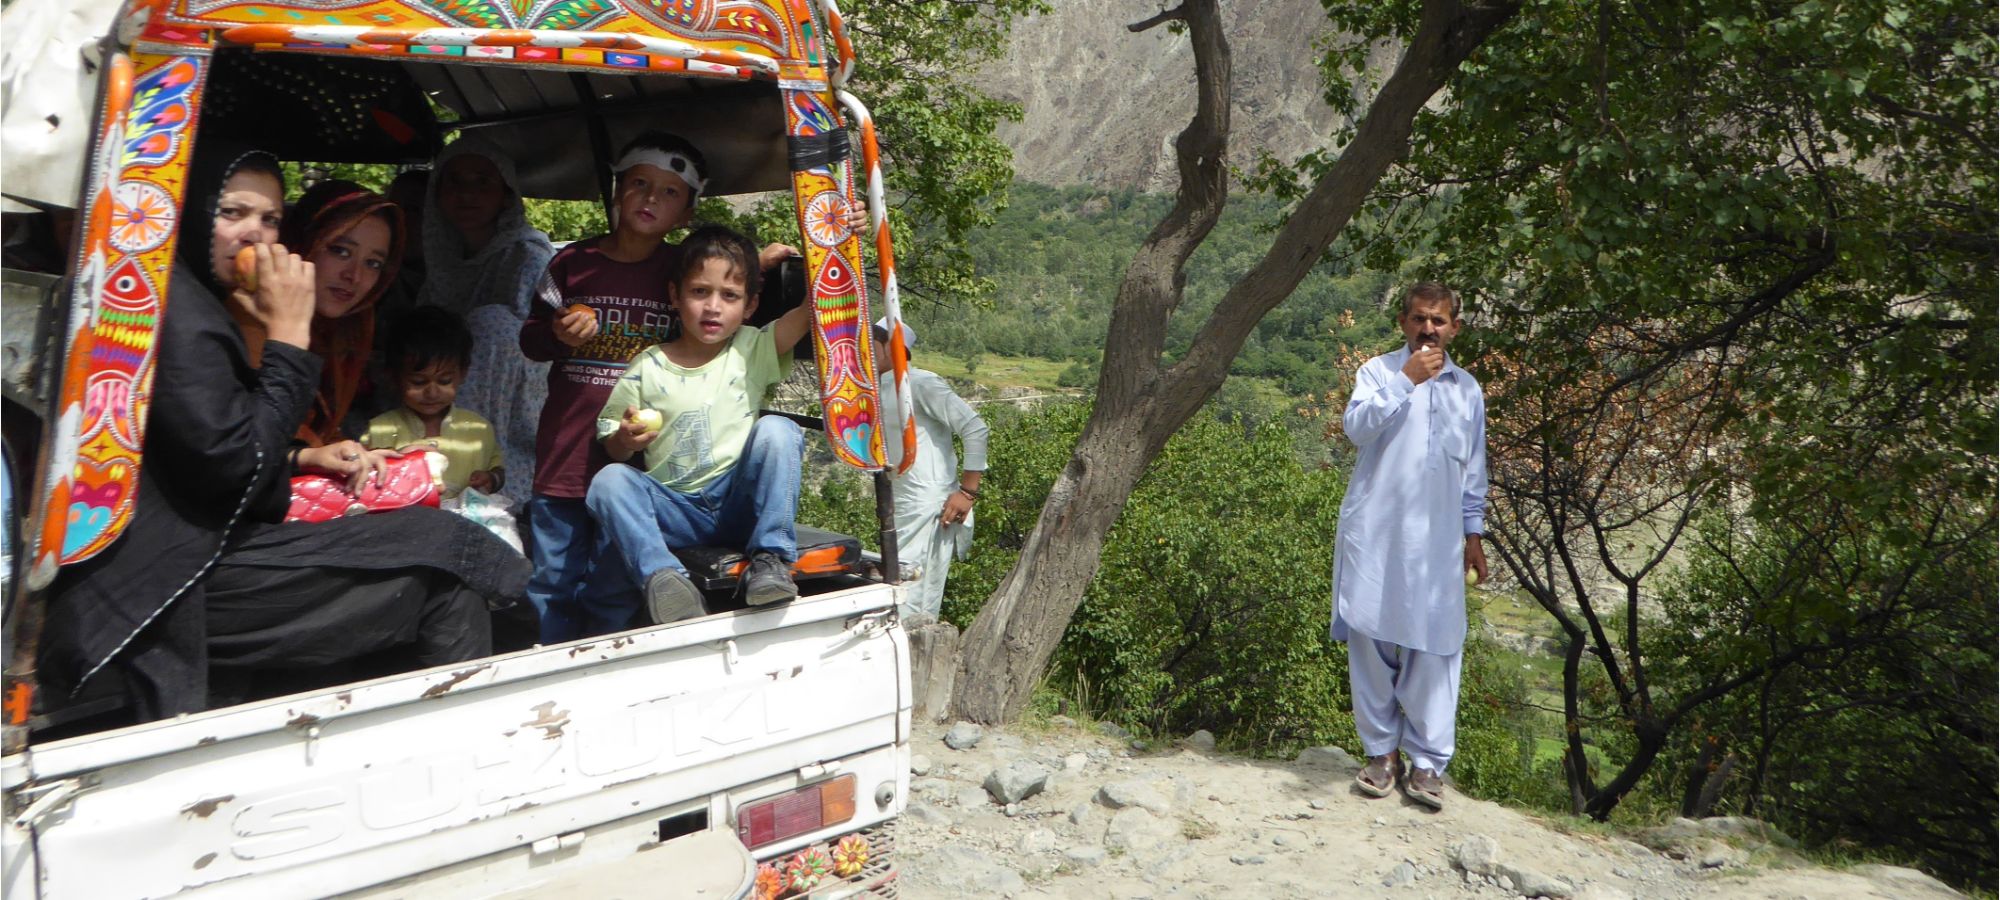 Taxi Service, Bagrot Valley, Pakistan